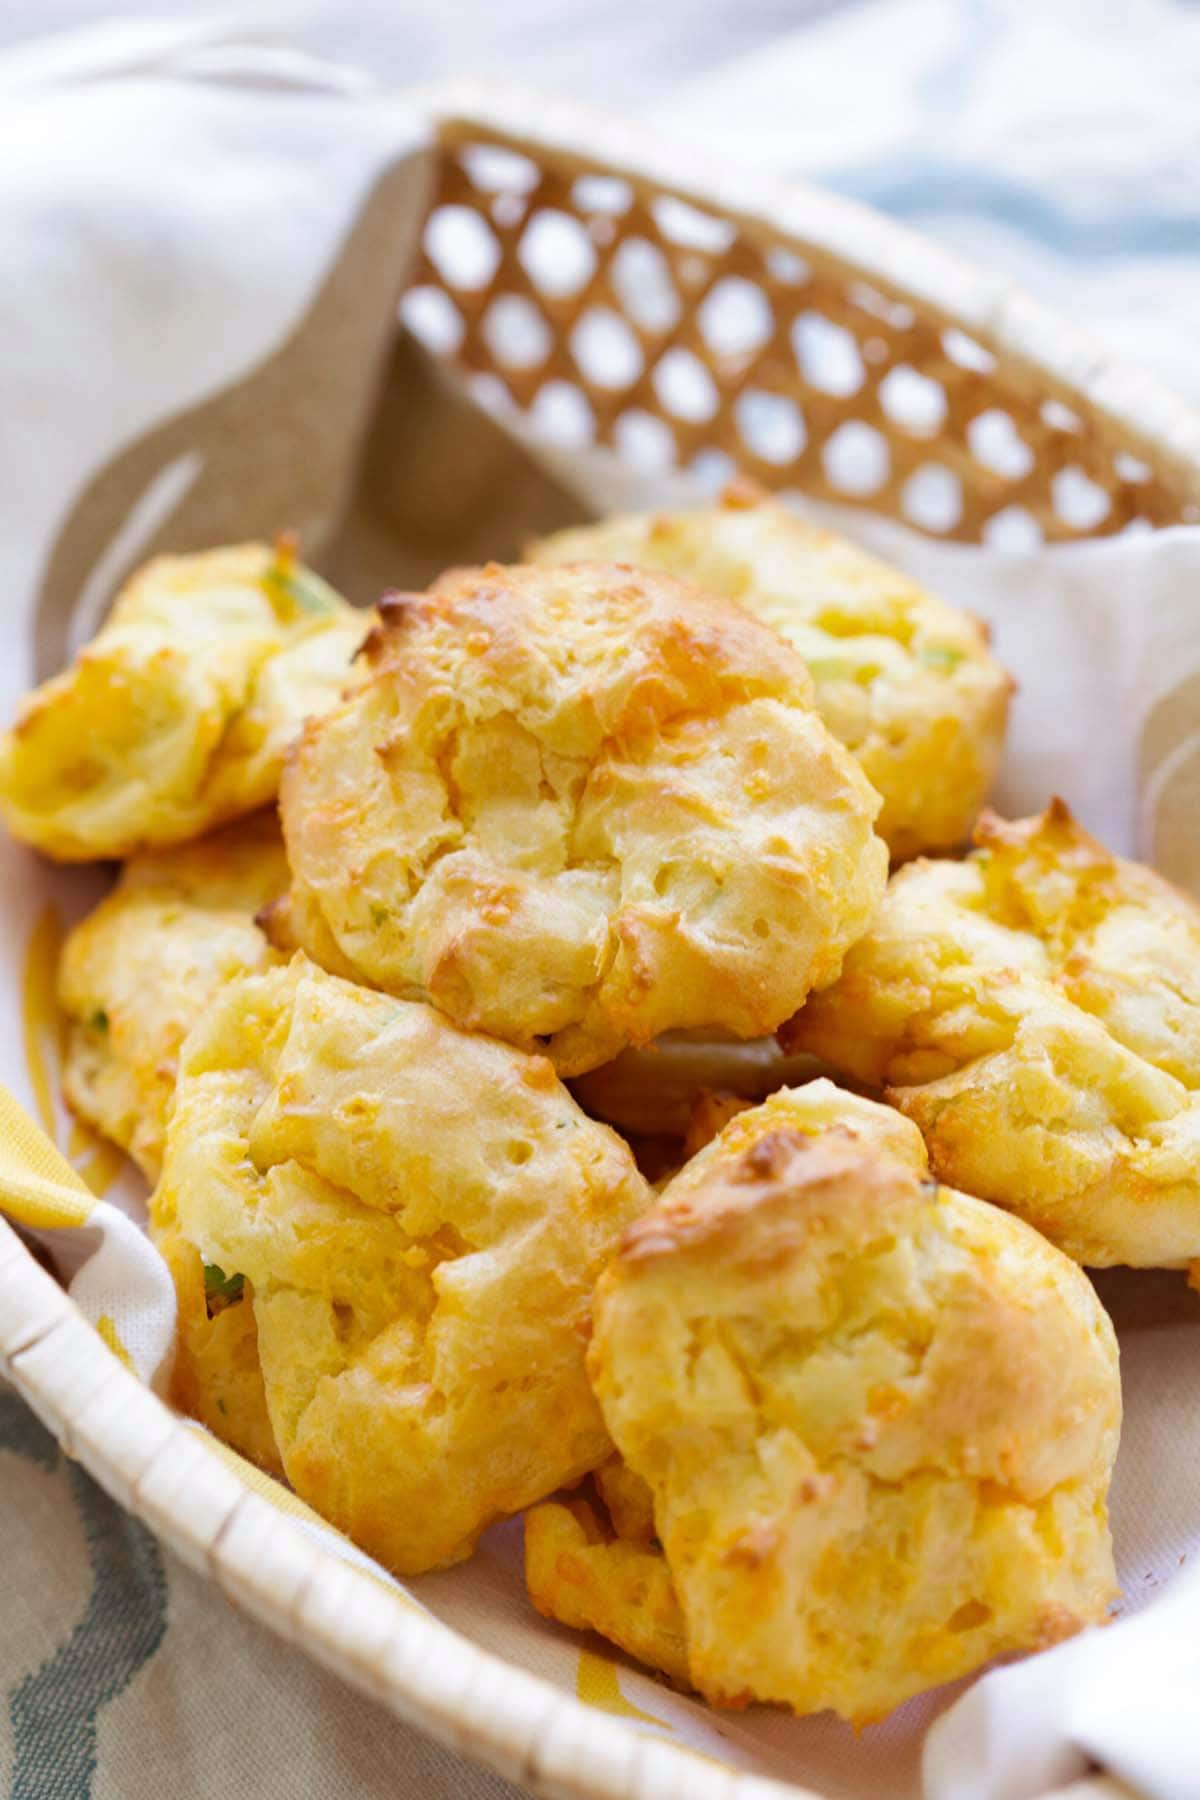 Cheesy fluffy golden brown puffs served in a basket.